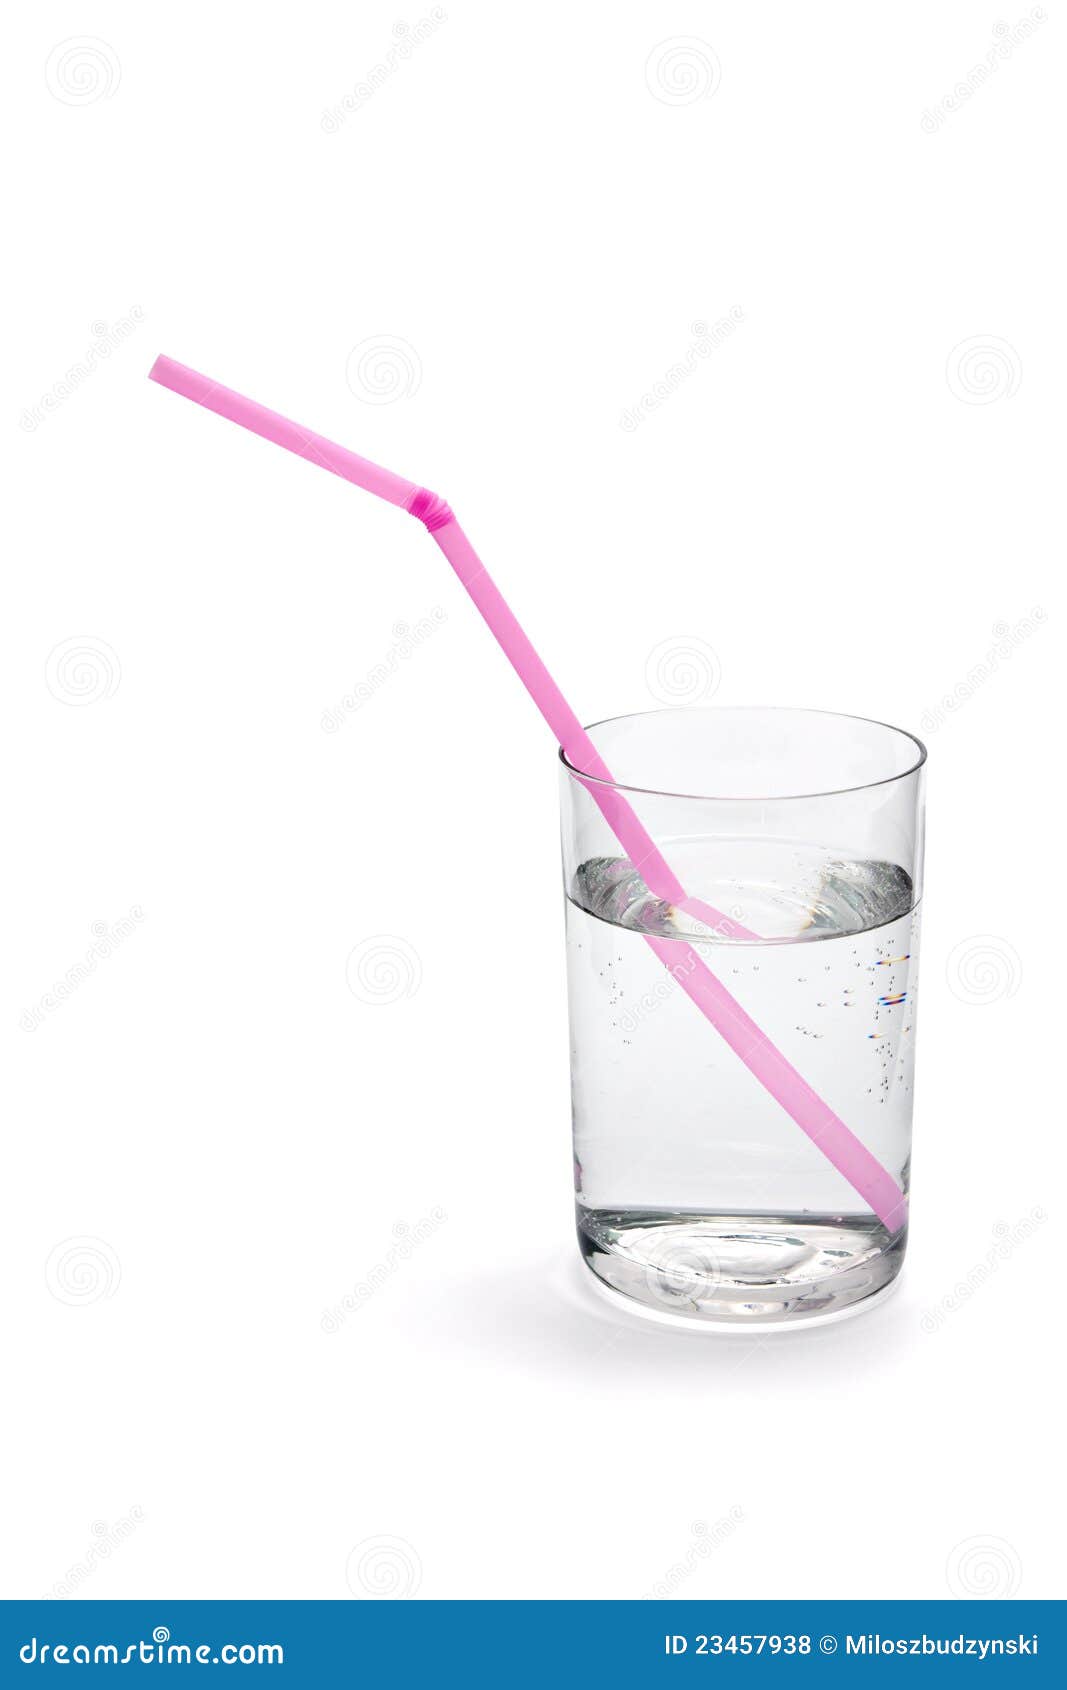 drinking straw - refraction in water